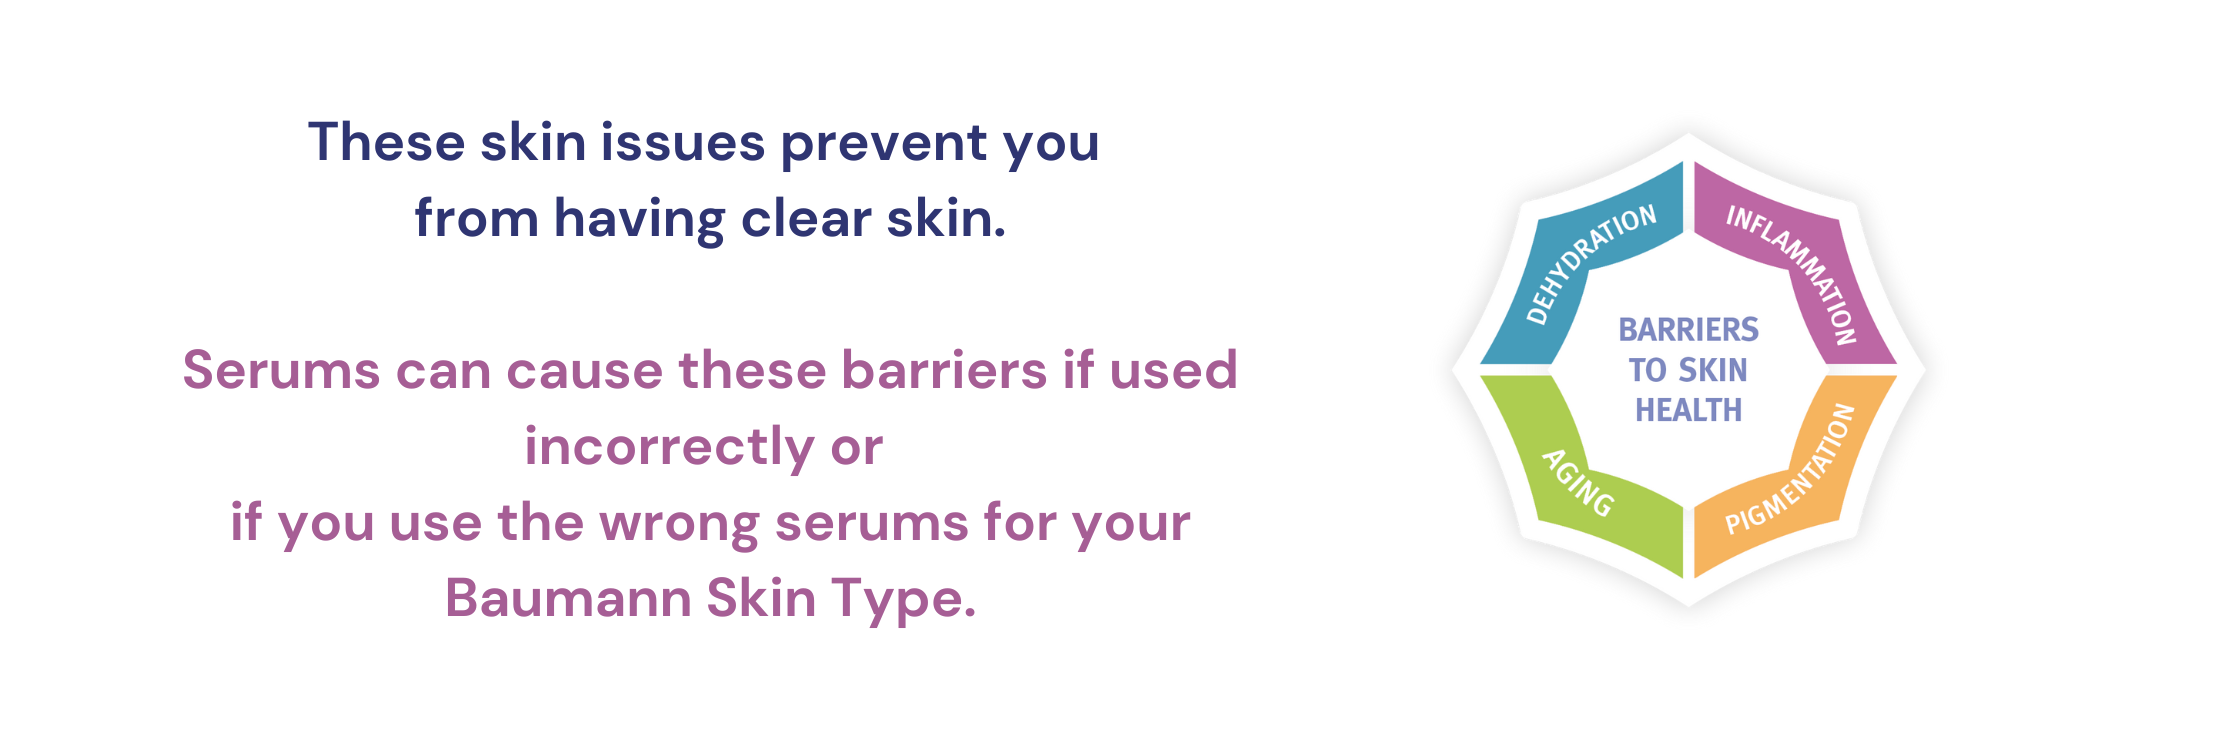 Barriers to skin health